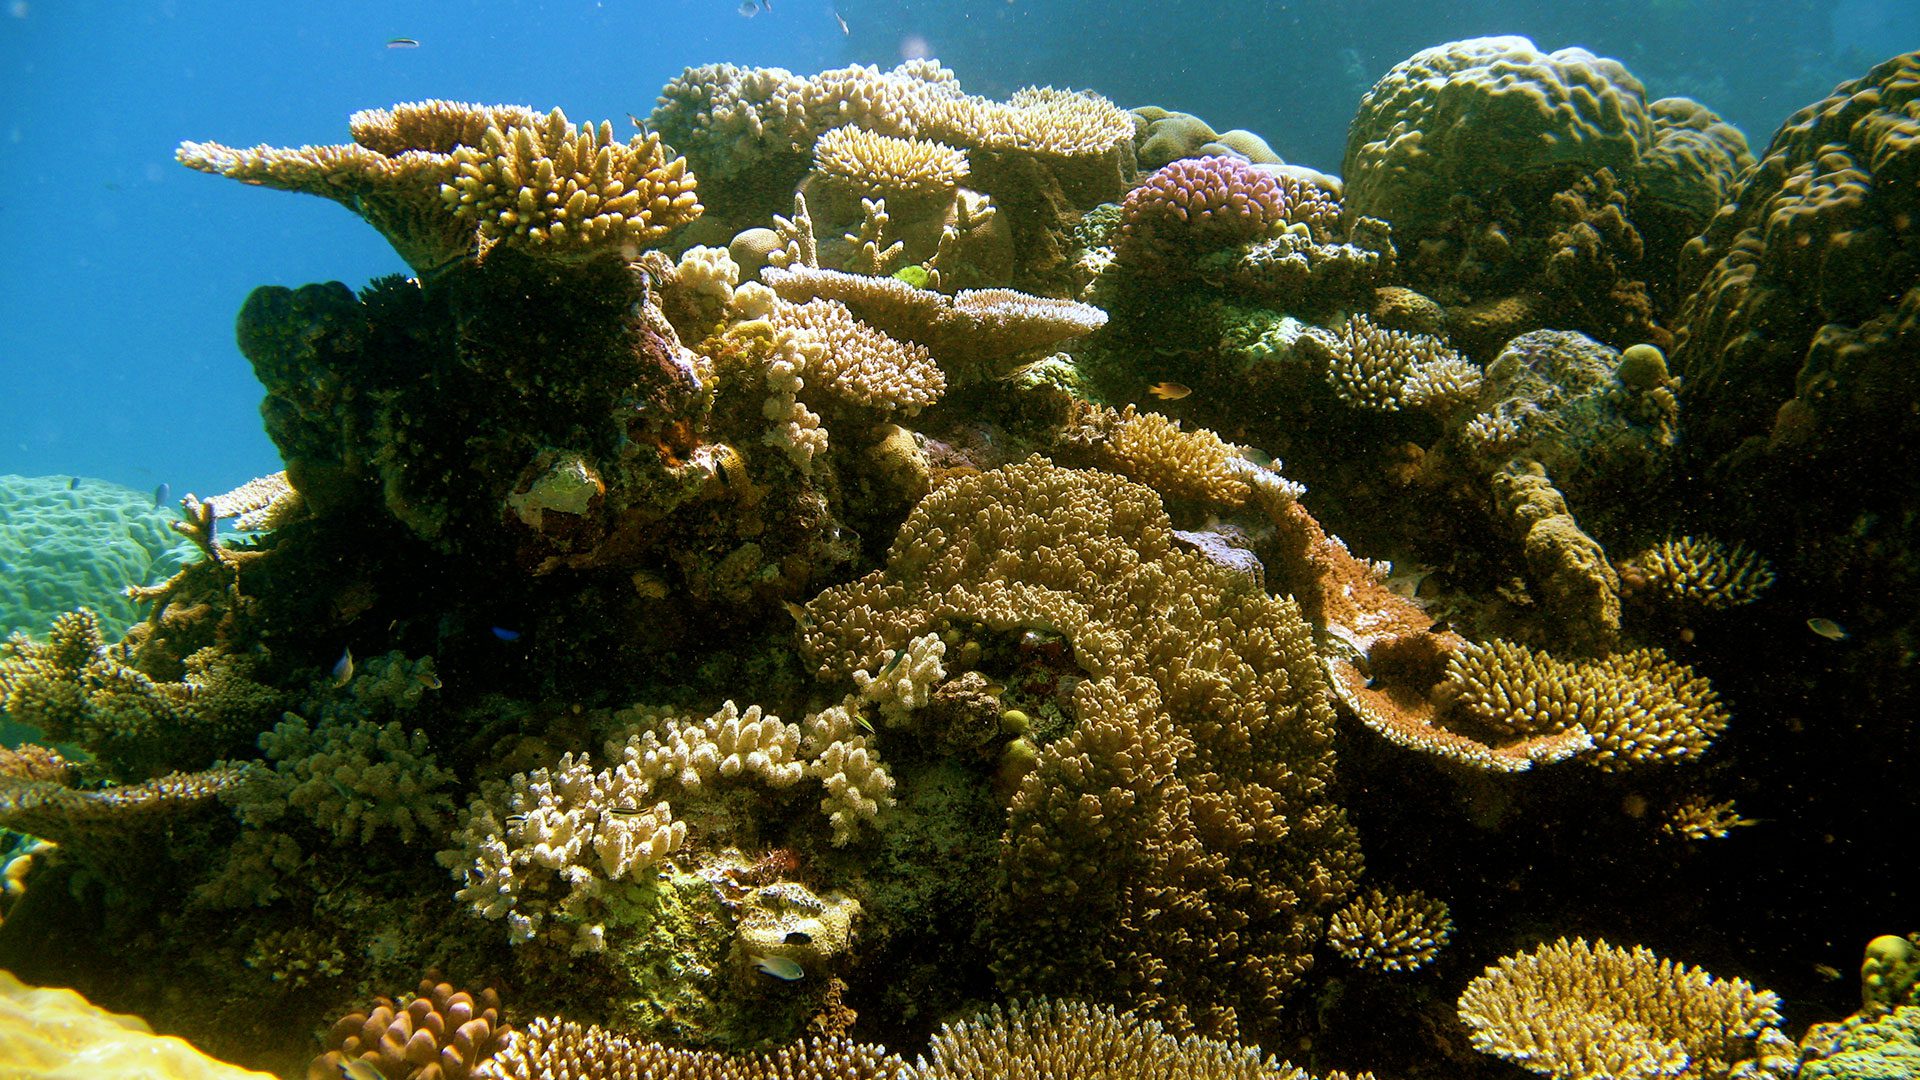 Are corals plants, animals, or rocks? - Woods Hole Oceanographic Institution